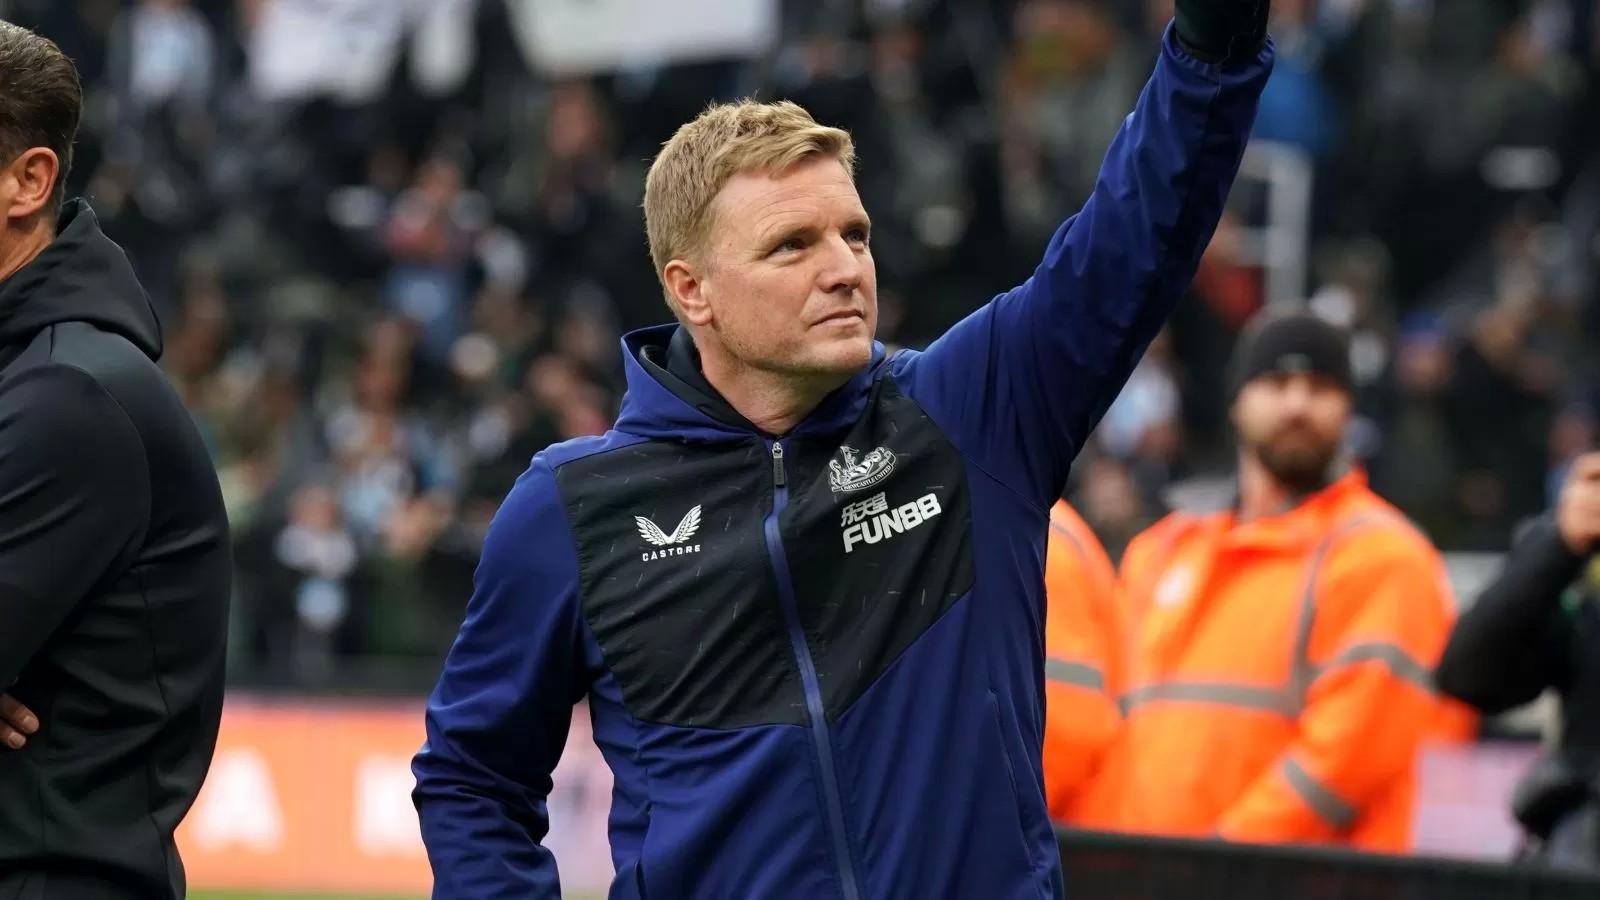 Newcastle have ‘ambitions to improve’ as Howe hopes relegation battles are in their past